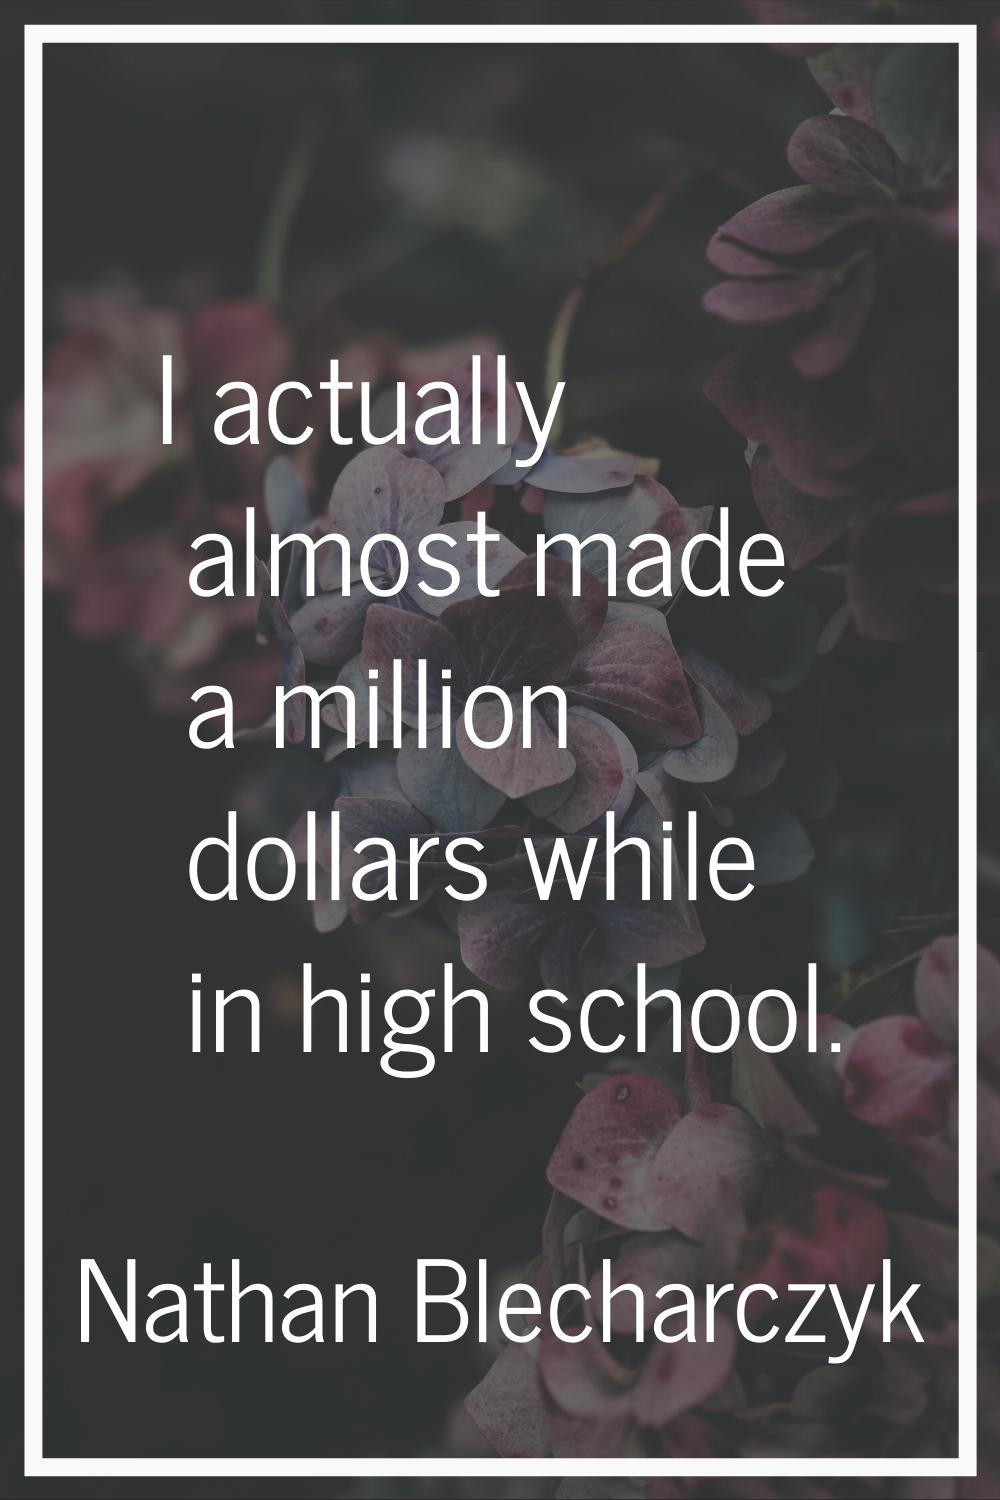 I actually almost made a million dollars while in high school.